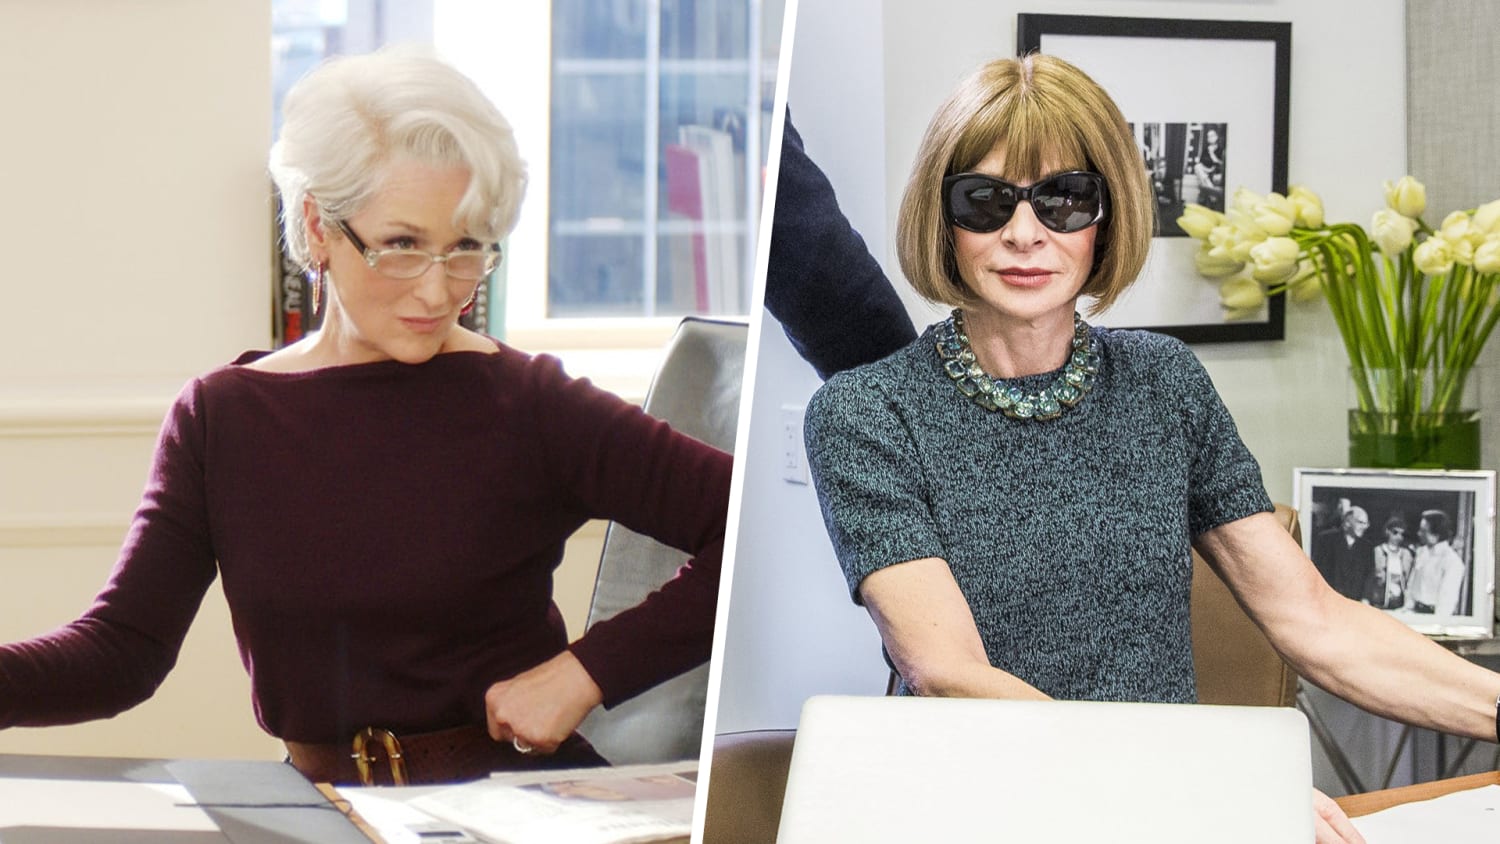 Meryl Streep channels 'Devil Wears Prada' character for meeting with Anna  Wintour